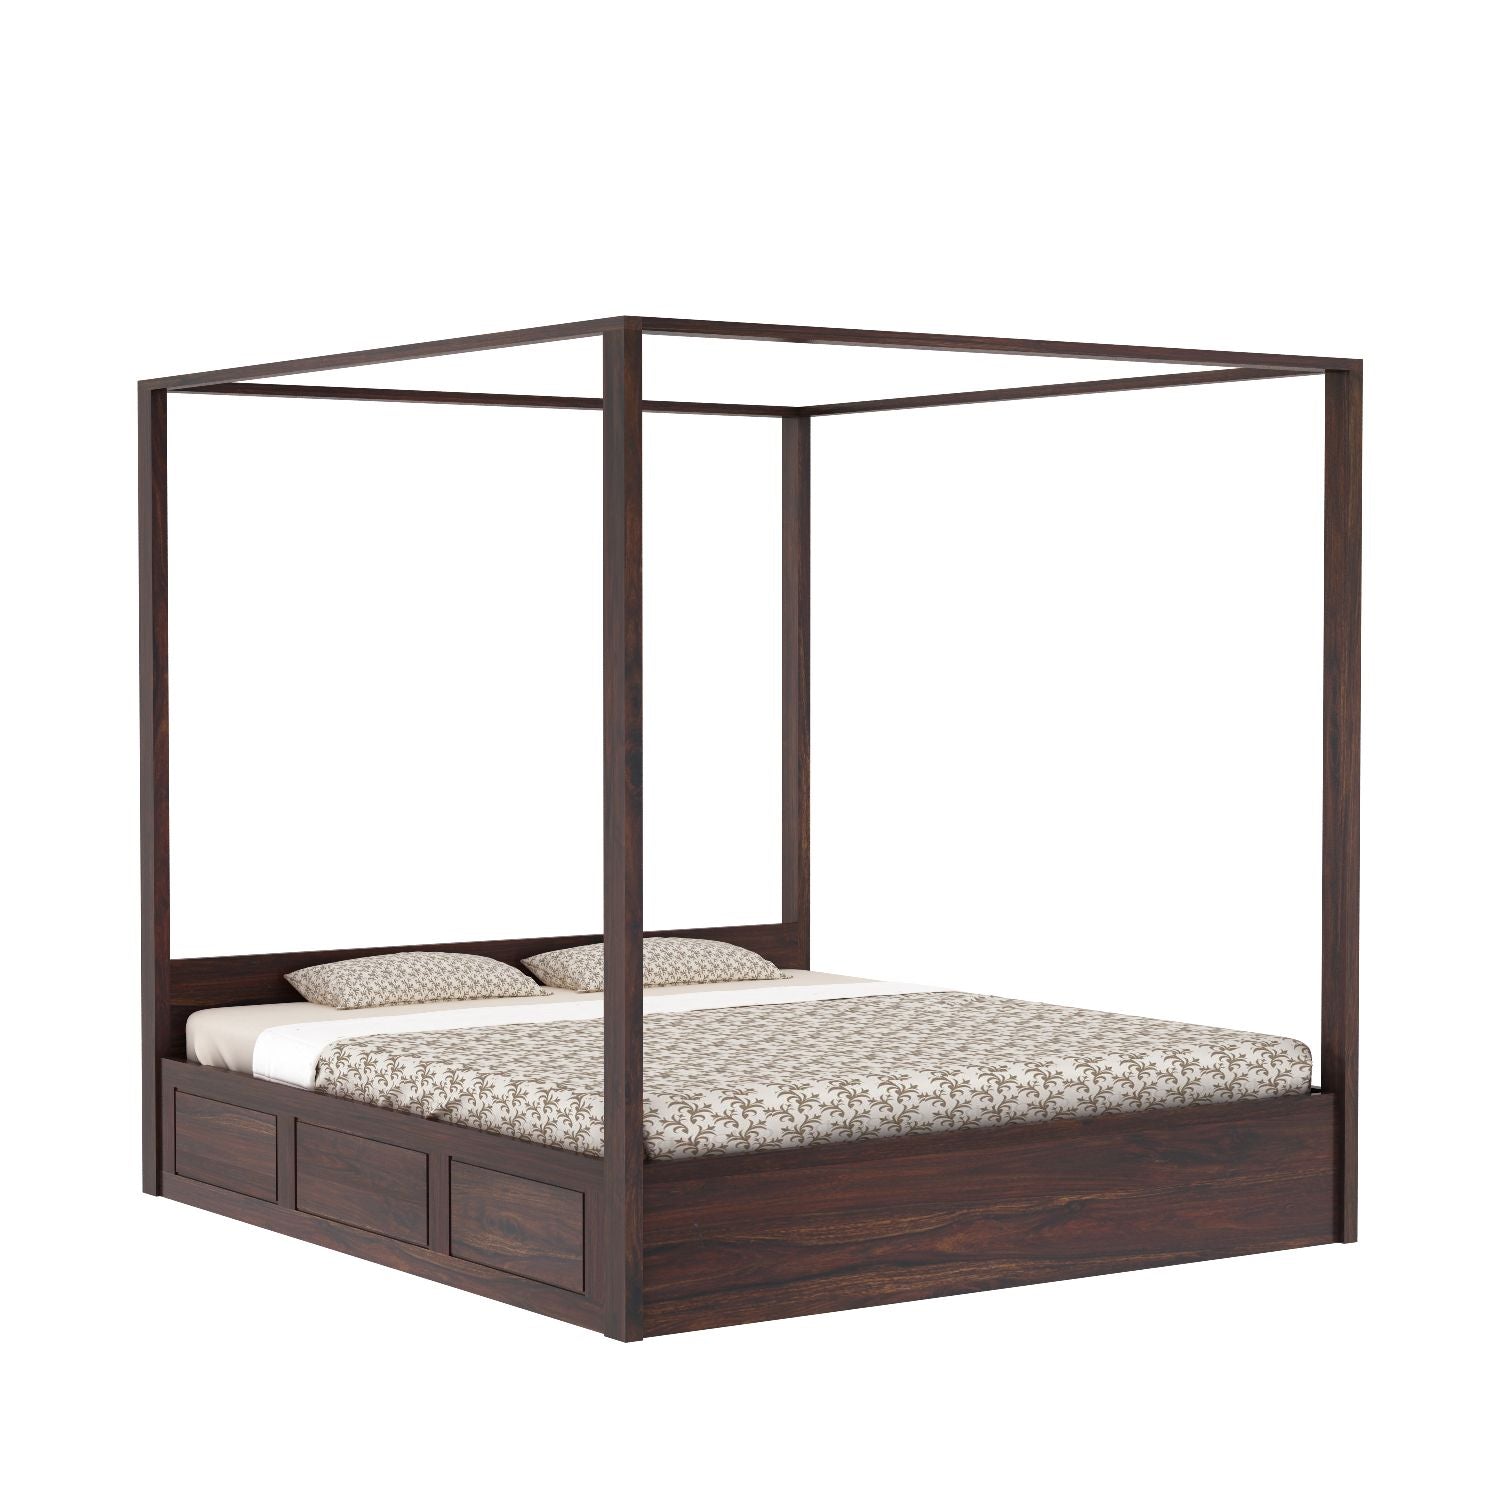 Solivo Solid Sheesham Wood Poster Bed With Box Storage (Queen Size, Walnut Finish)